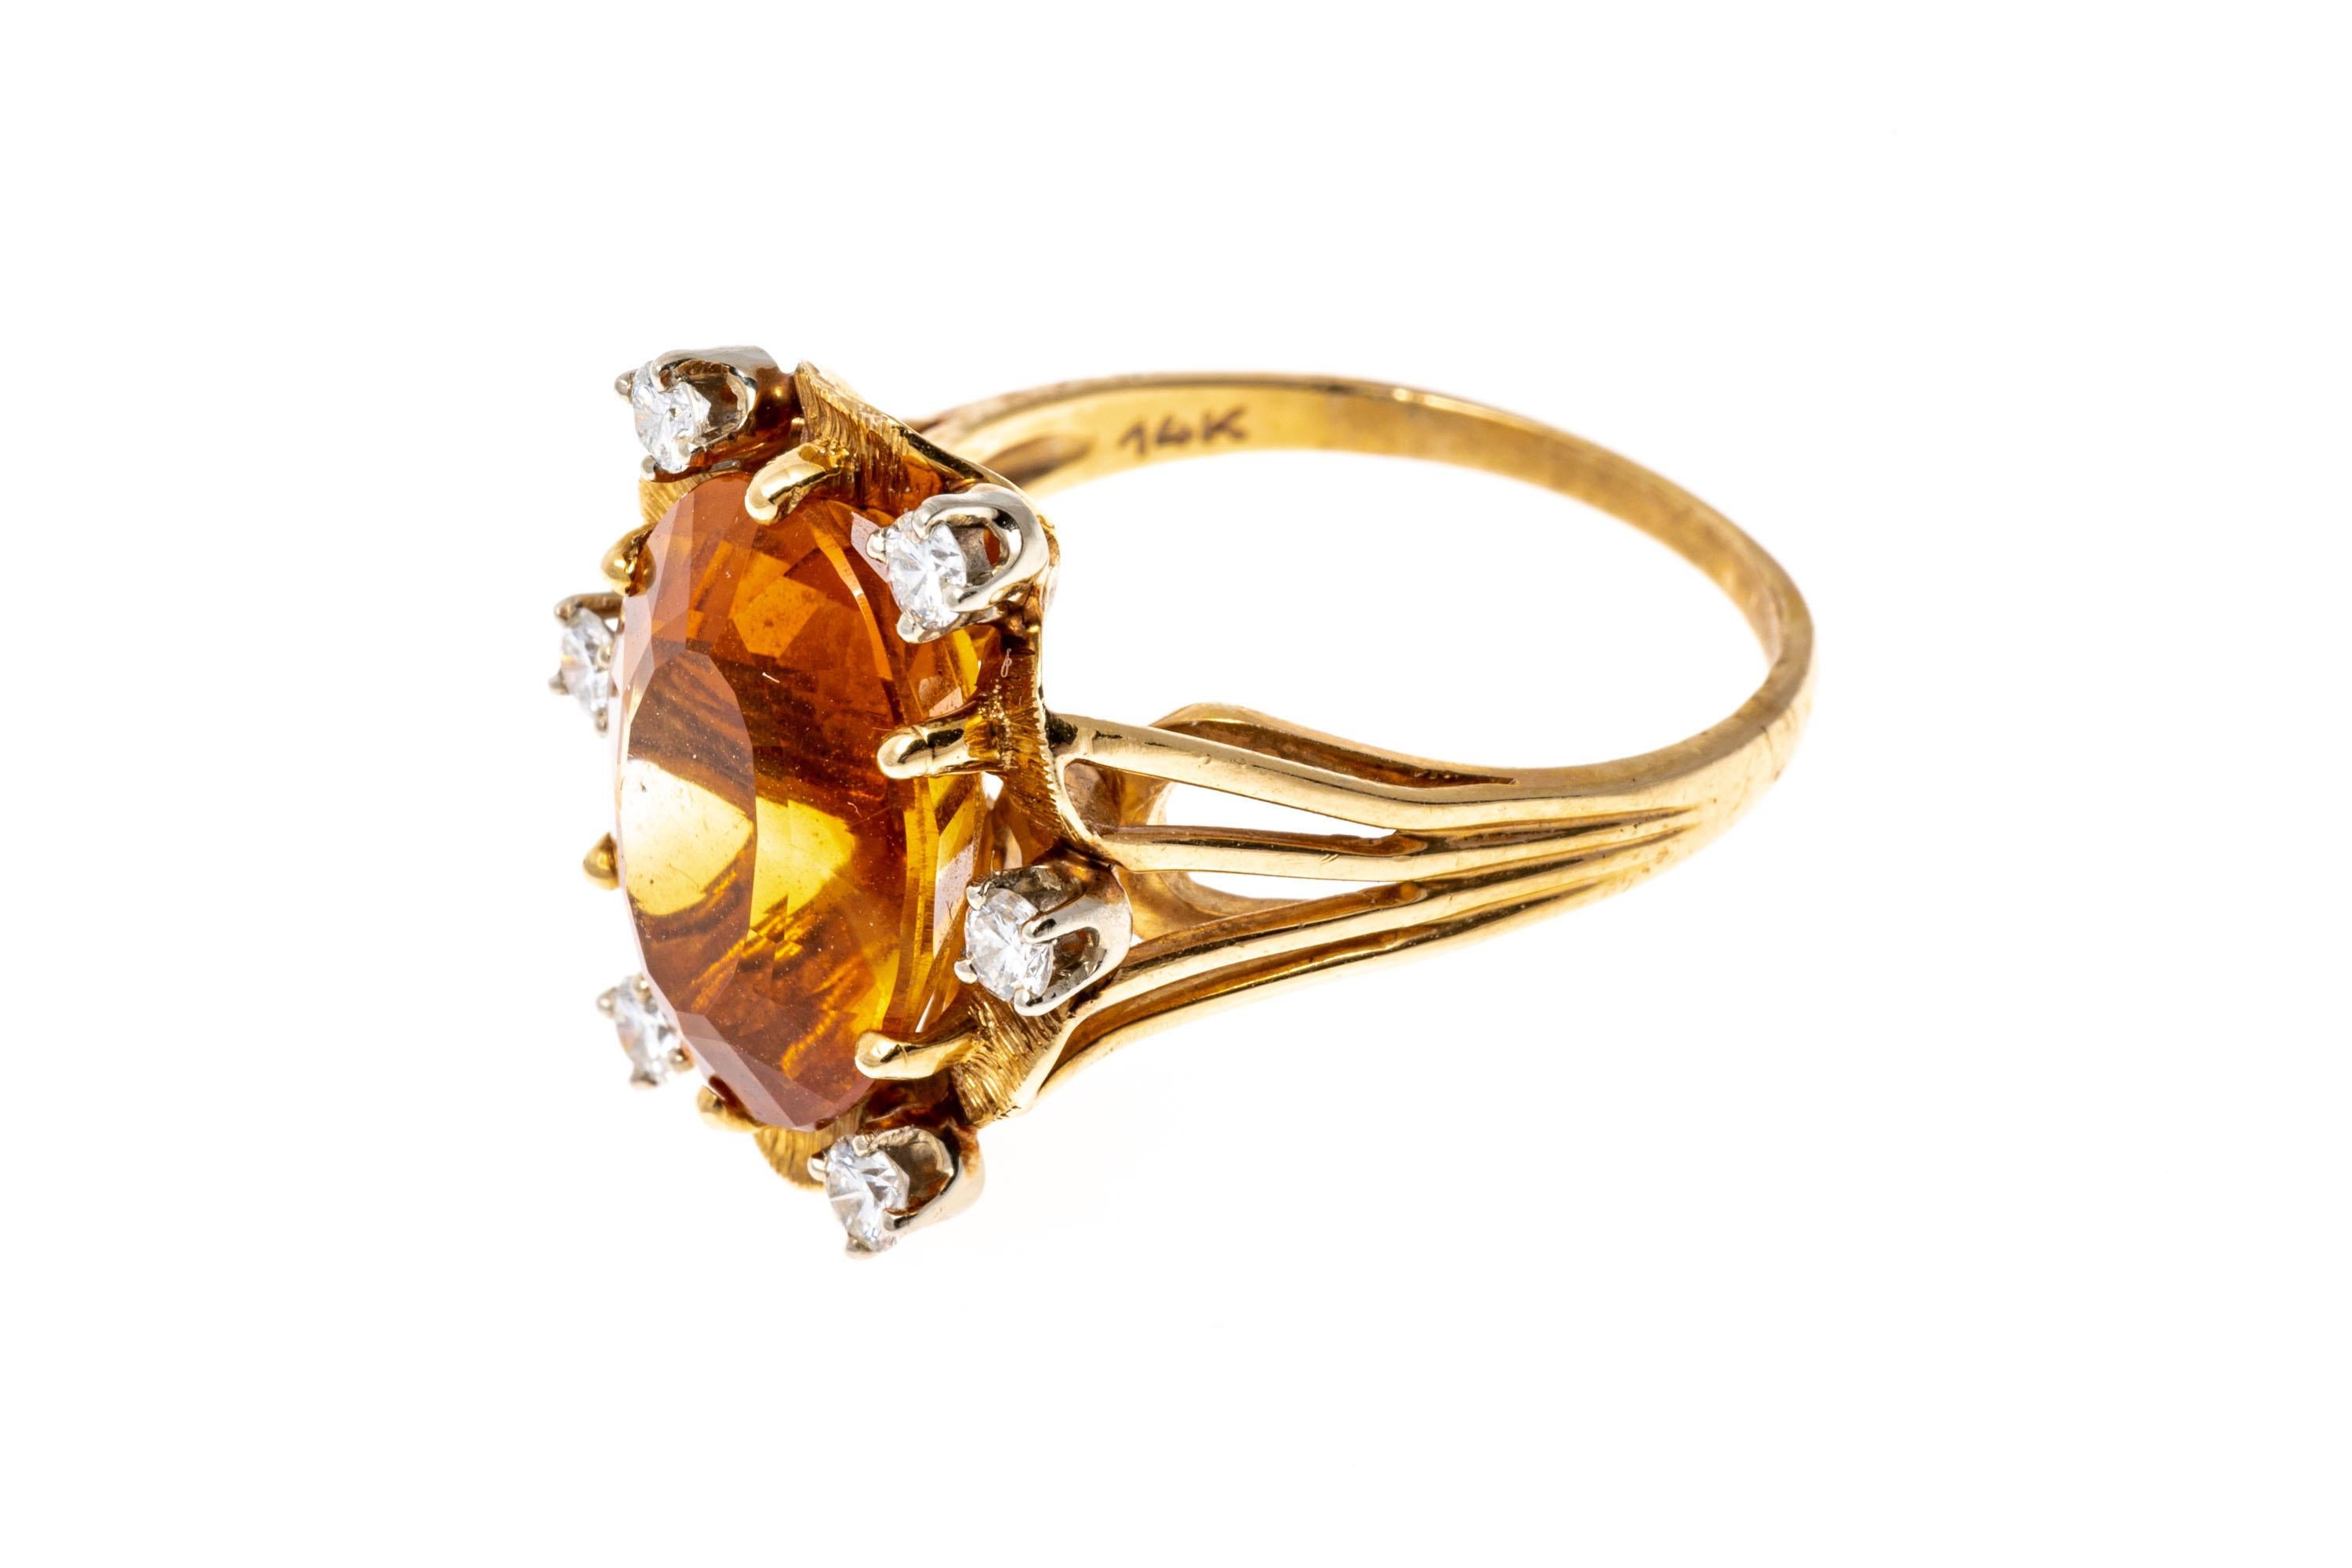 Women's 14k Oval Citrine 'App. 5.10 CTS' And Diamond Scalloped Framed Ring For Sale